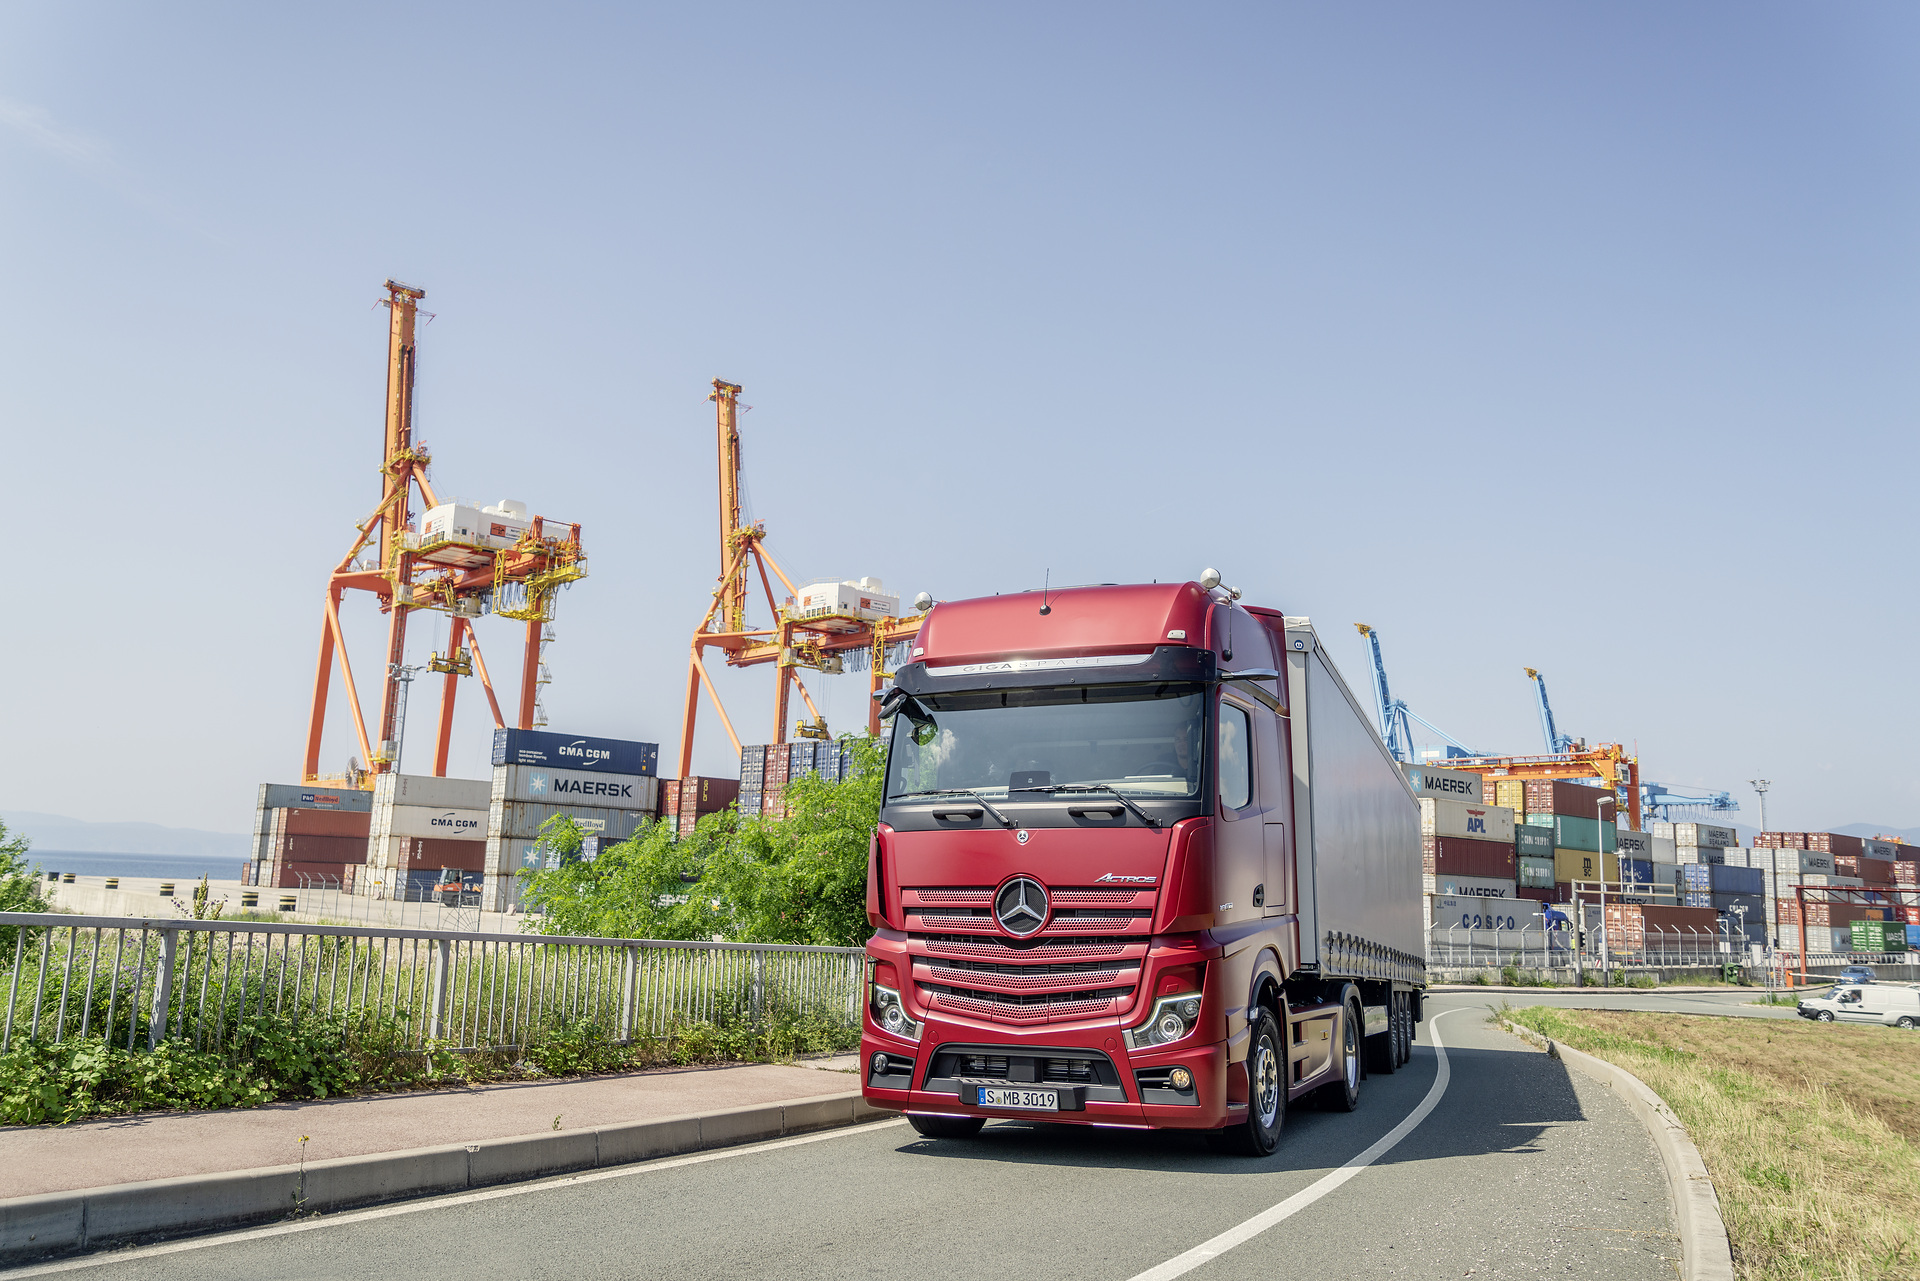 World premiere of the new Mercedes-Benz Trucks flagship in Berlin: The new Actros with Active Drive Assist: Mercedes-Benz Trucks puts partially automated driving into series production